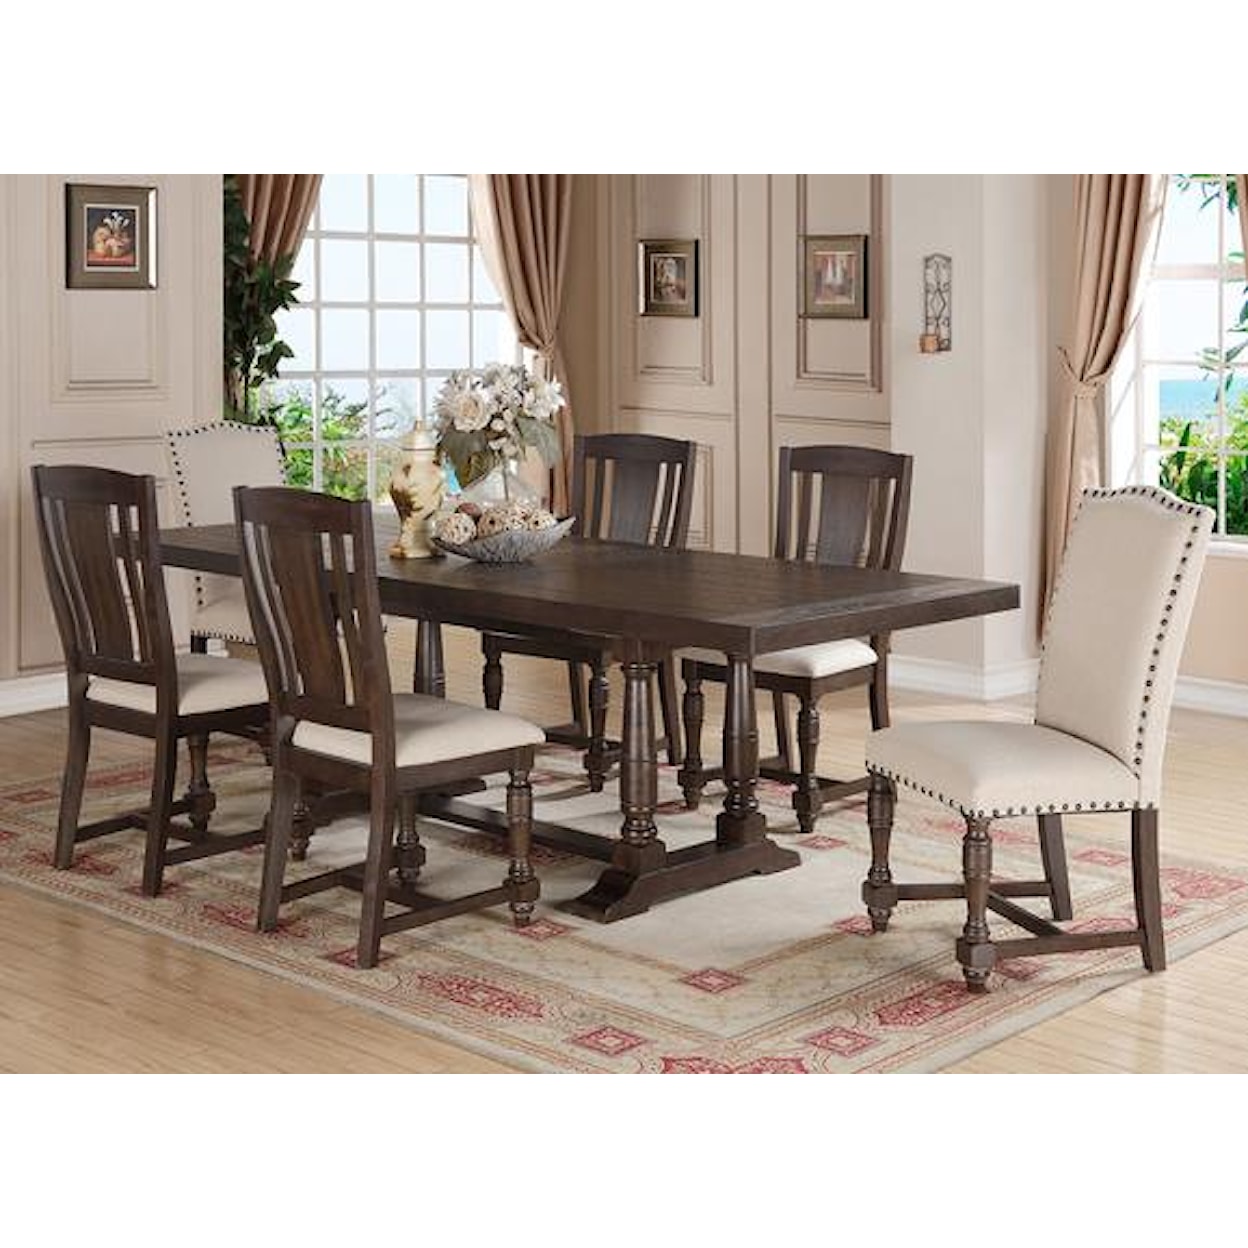 Winners Only Xcalibur 7-Piece Table and Chair Set